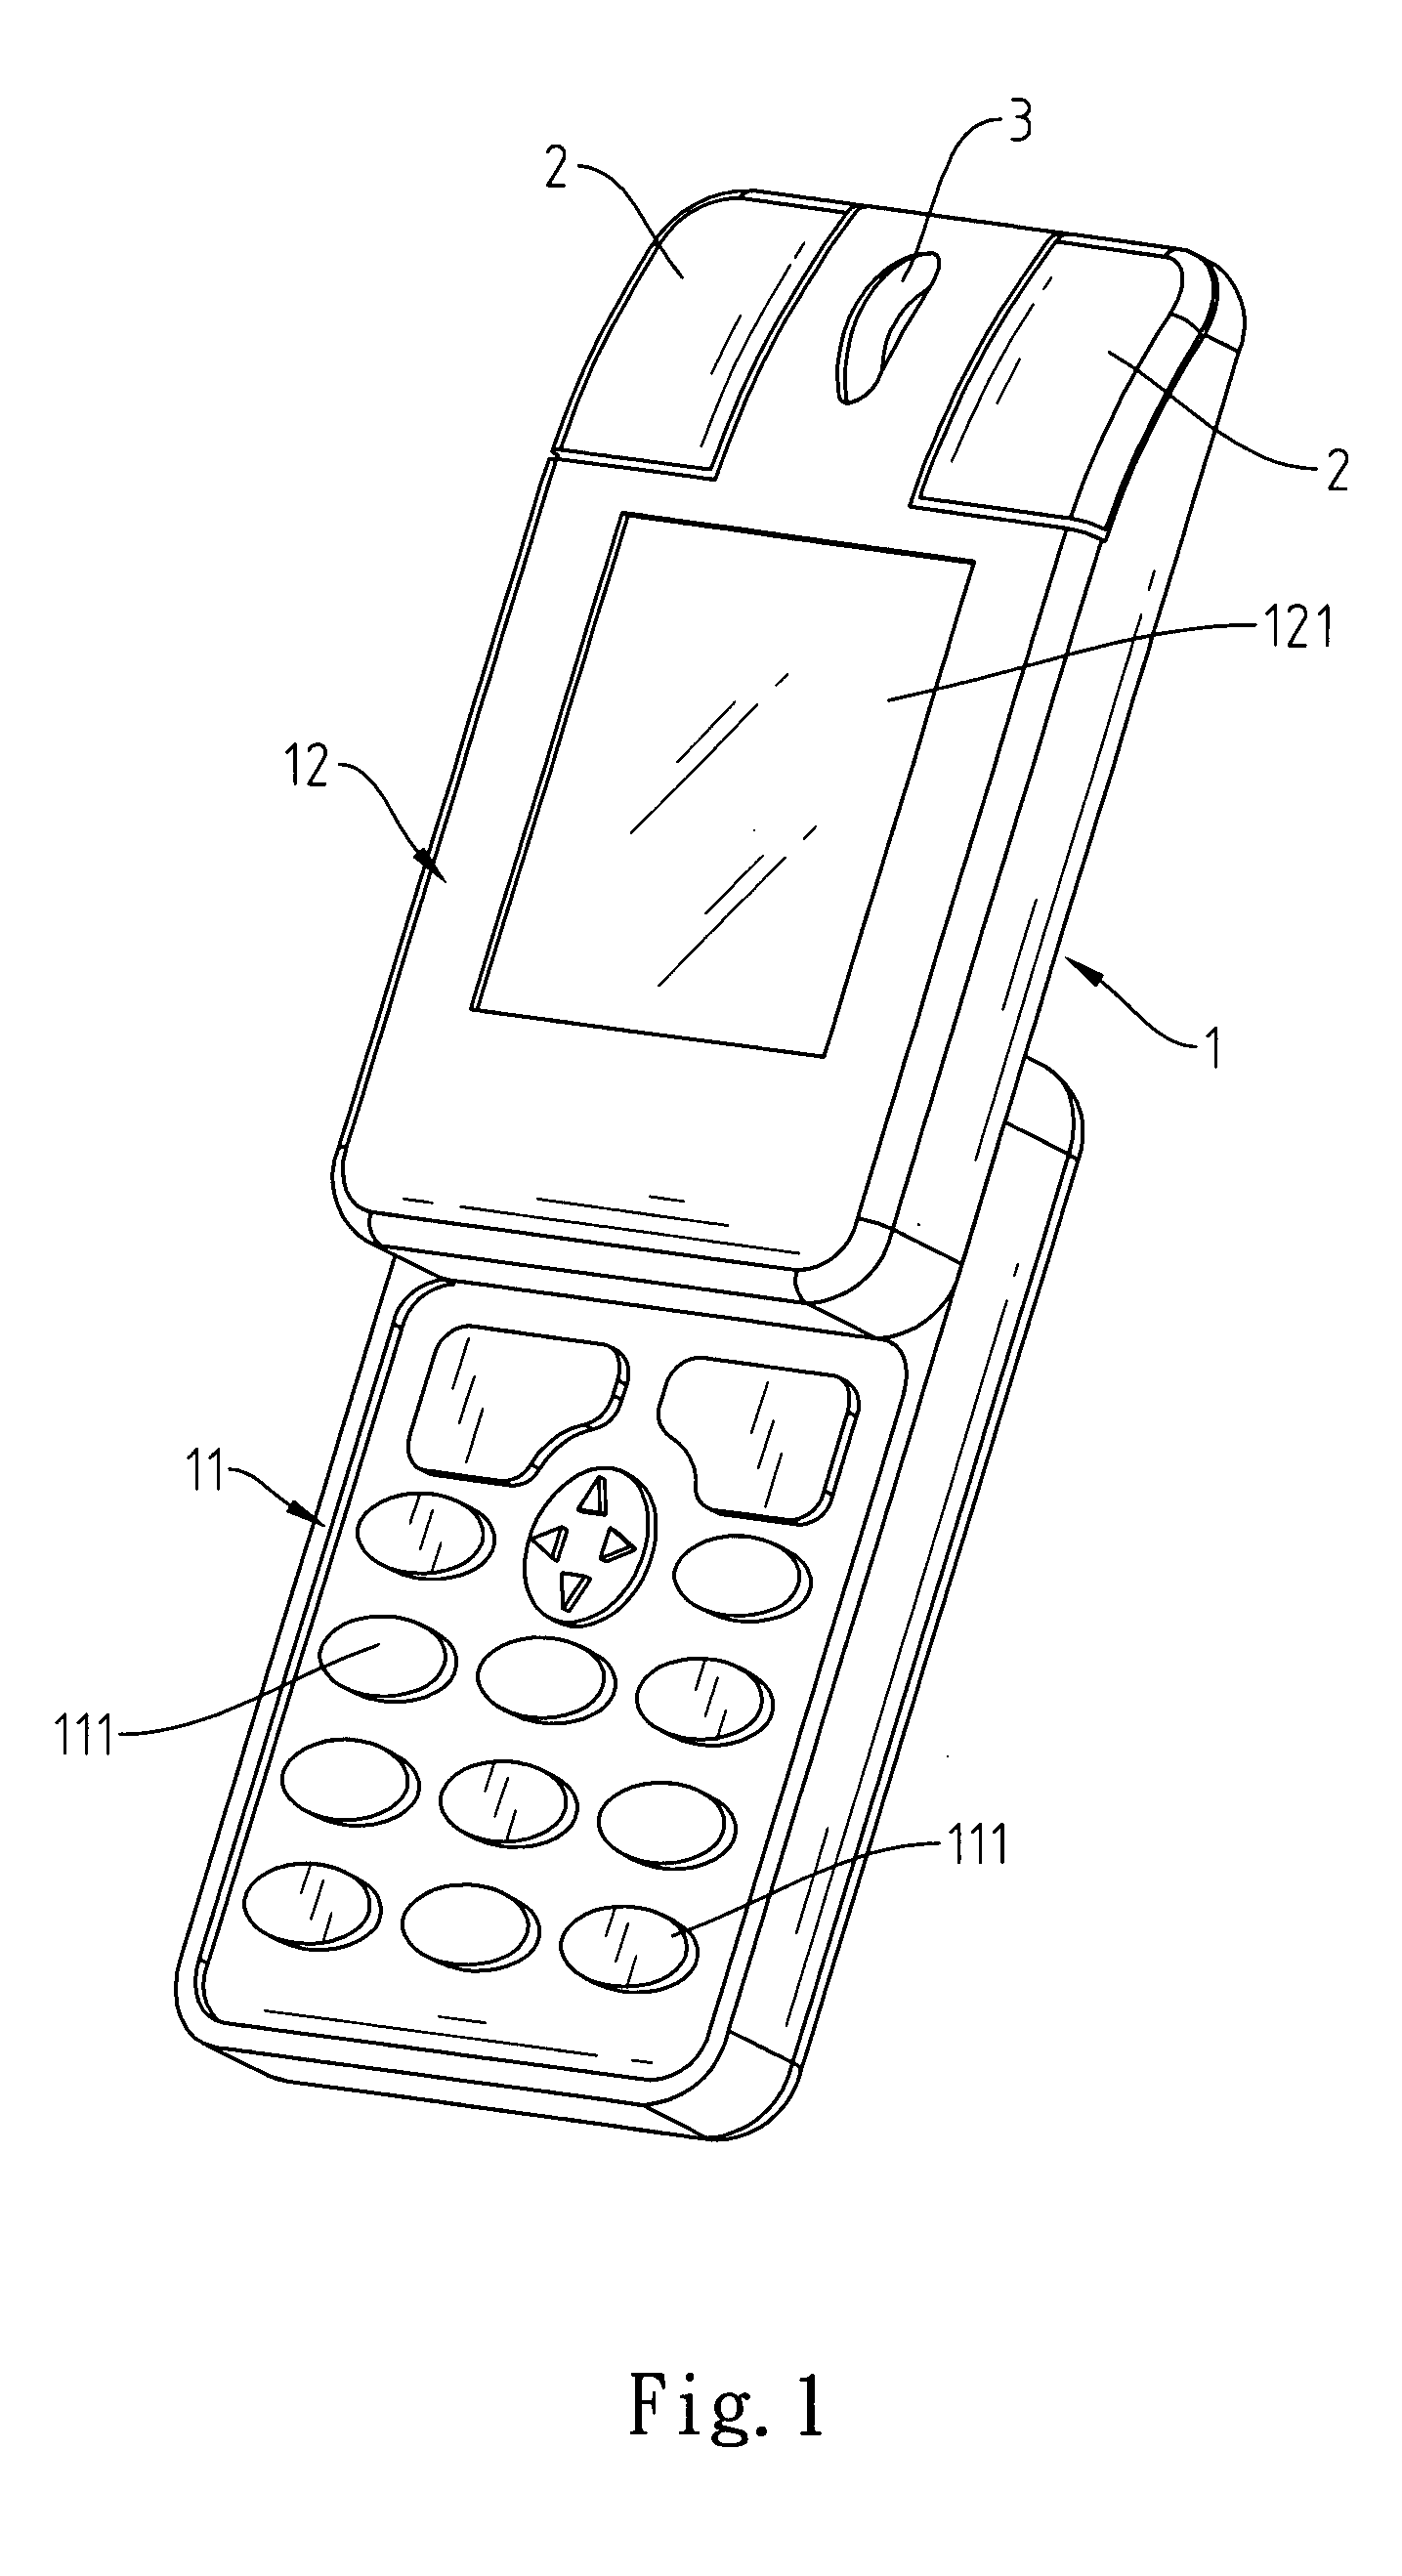 Mouse-type mobile phone